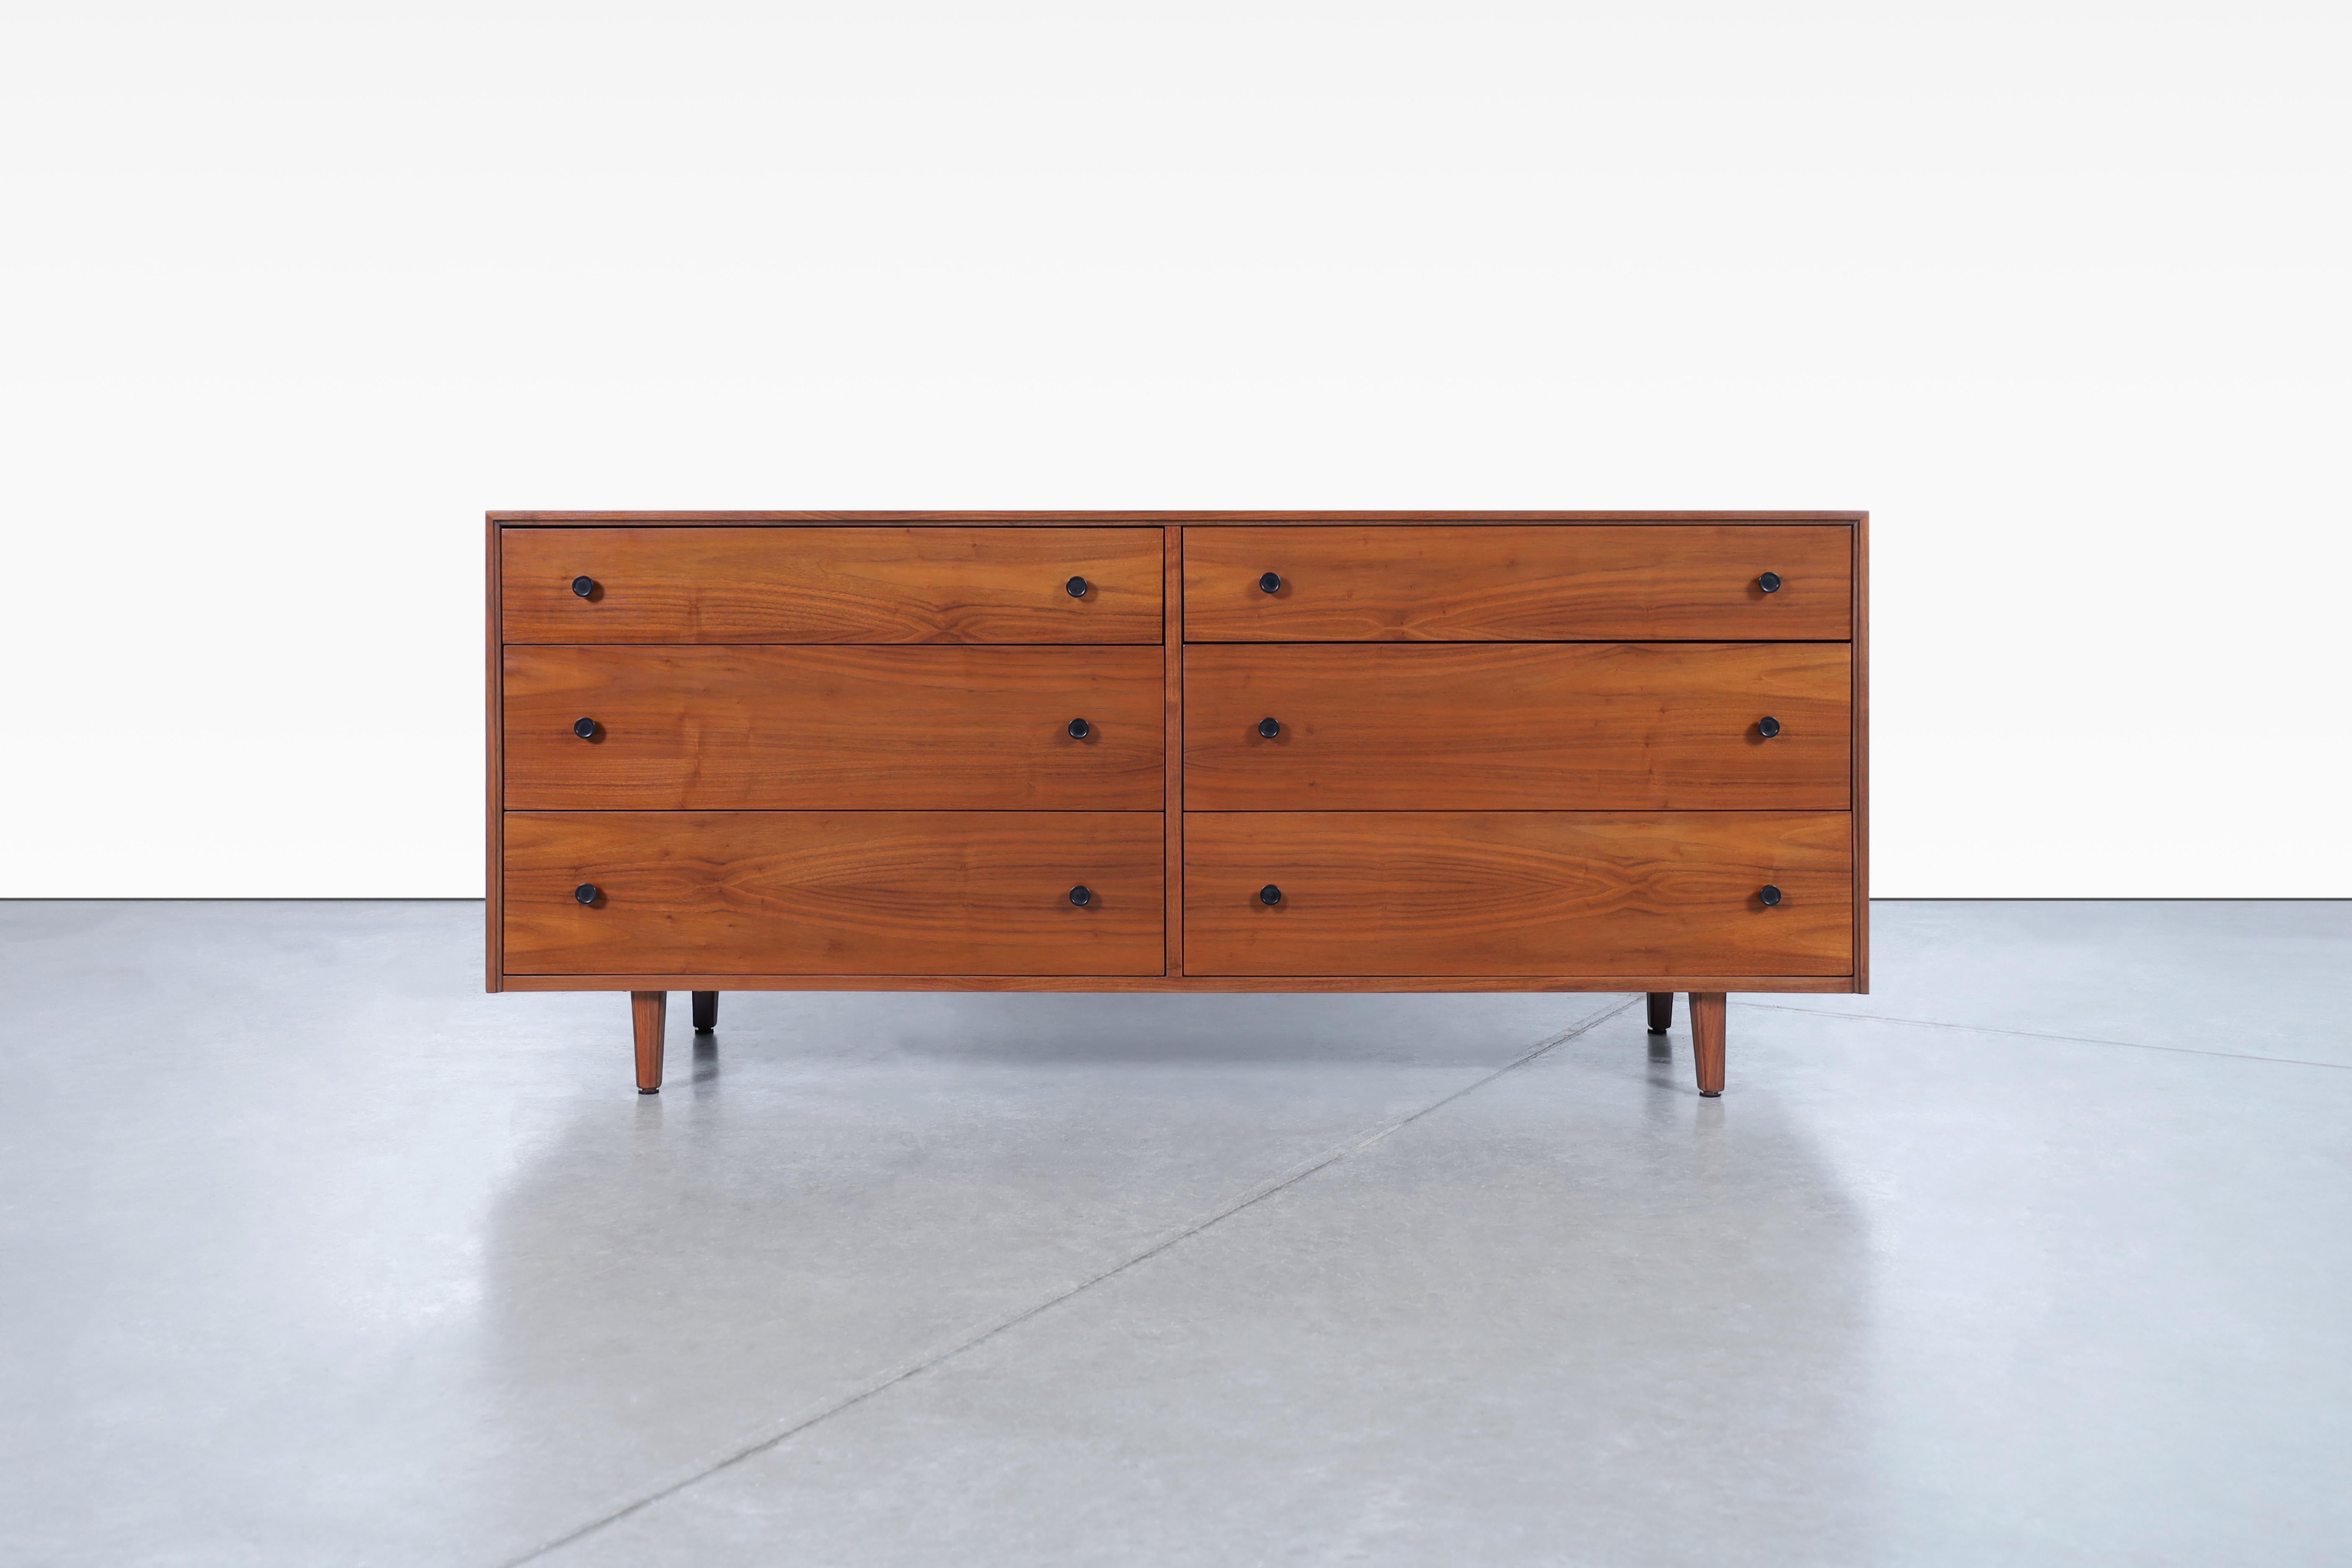 Beautiful mid-century modern walnut chest of drawers attributed to Kipp Steward for Glenn of California, designed in the United States, circa 1960's. This stunning piece has been professionally restored, giving it an exquisite vintage look that is